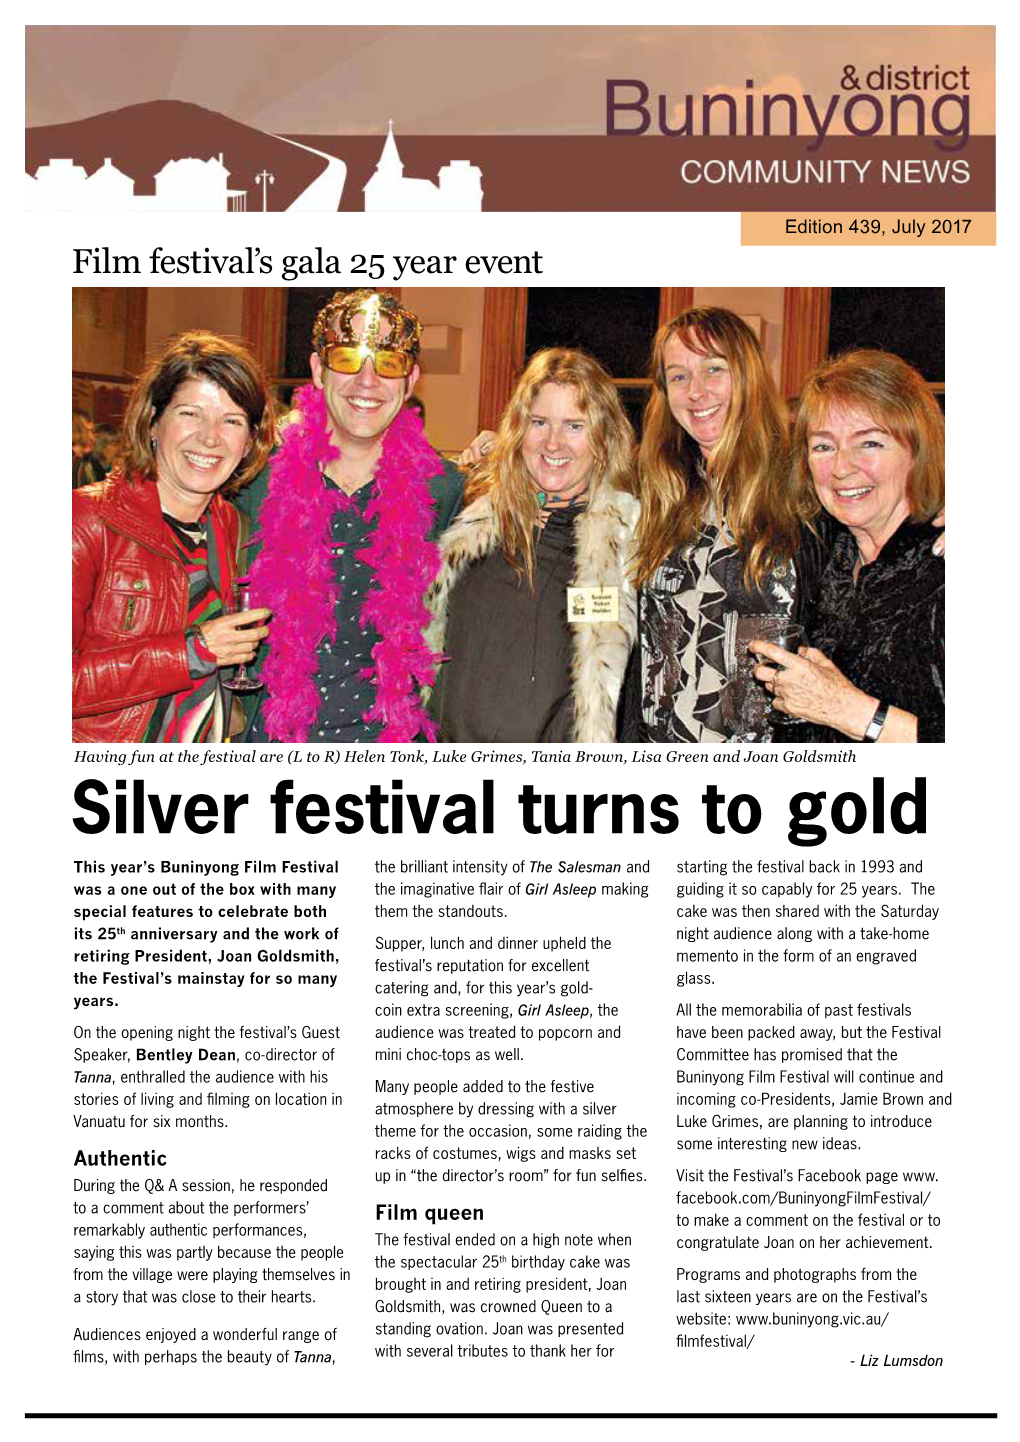 Silver Festival Turns to Gold